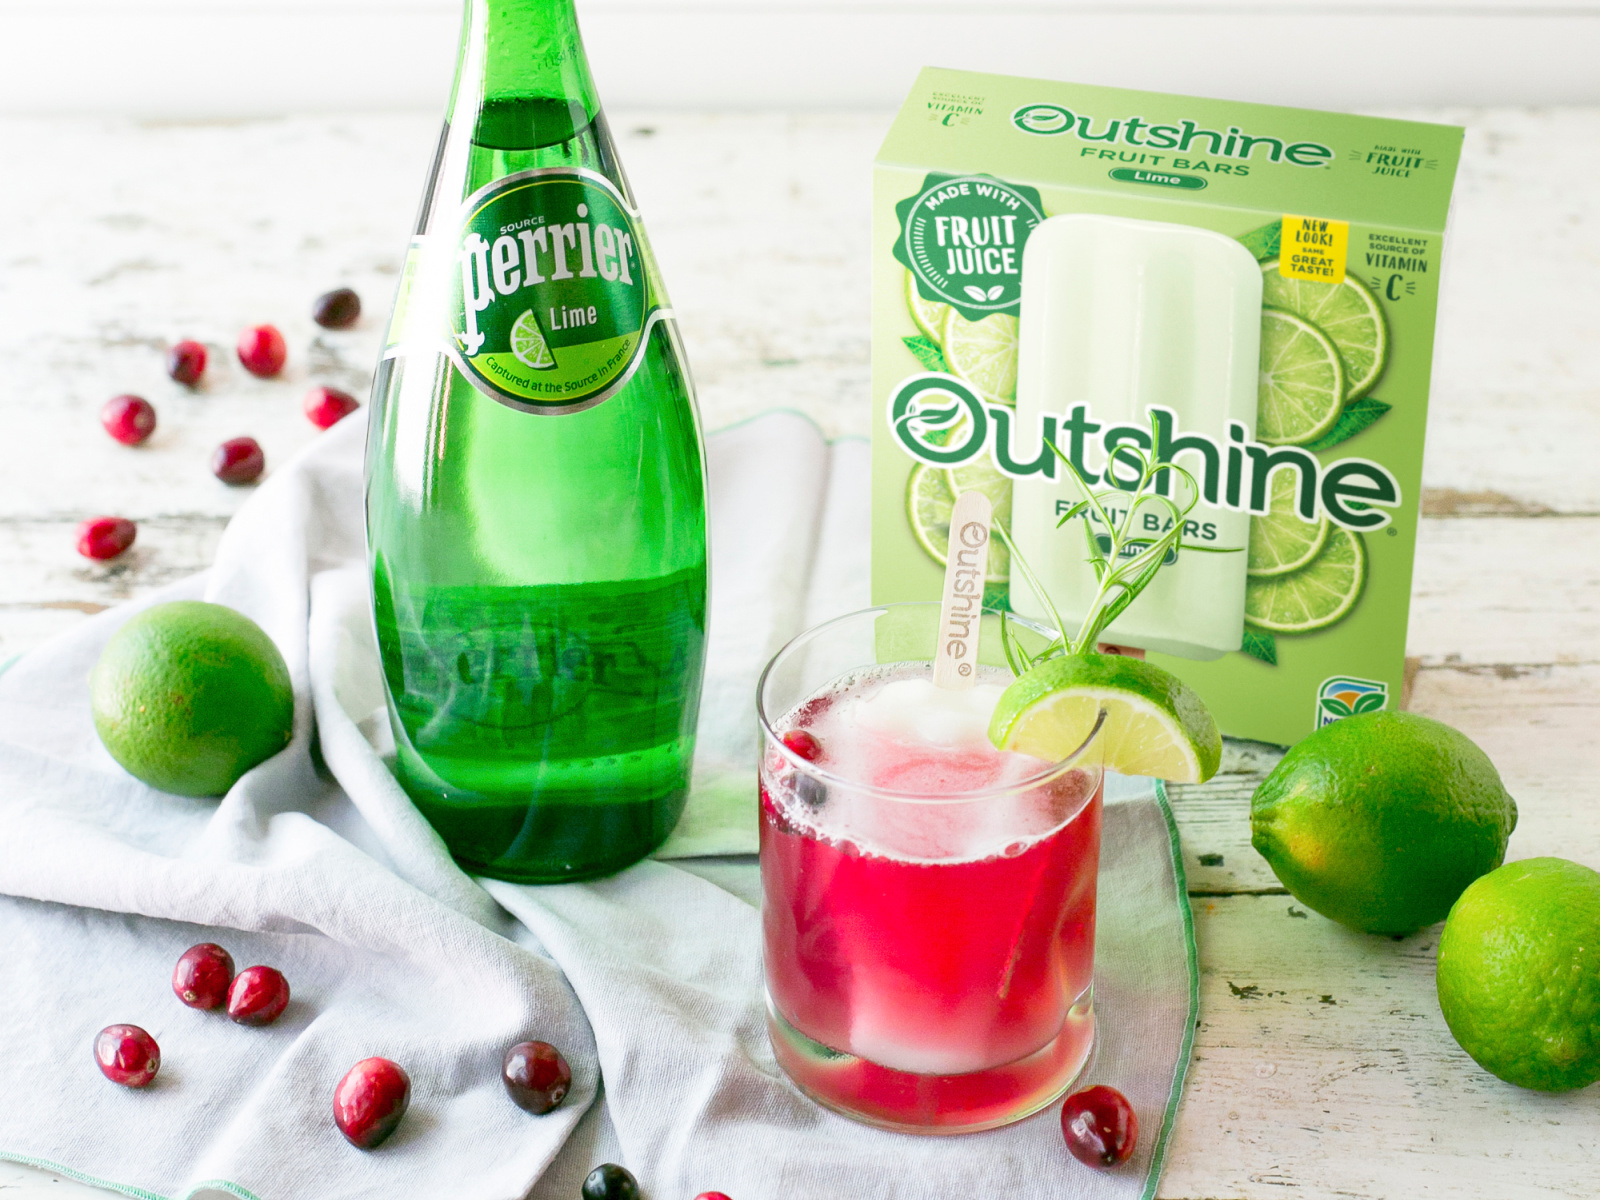 Outshine Bars As Low As $2.29 Per Box At Kroger